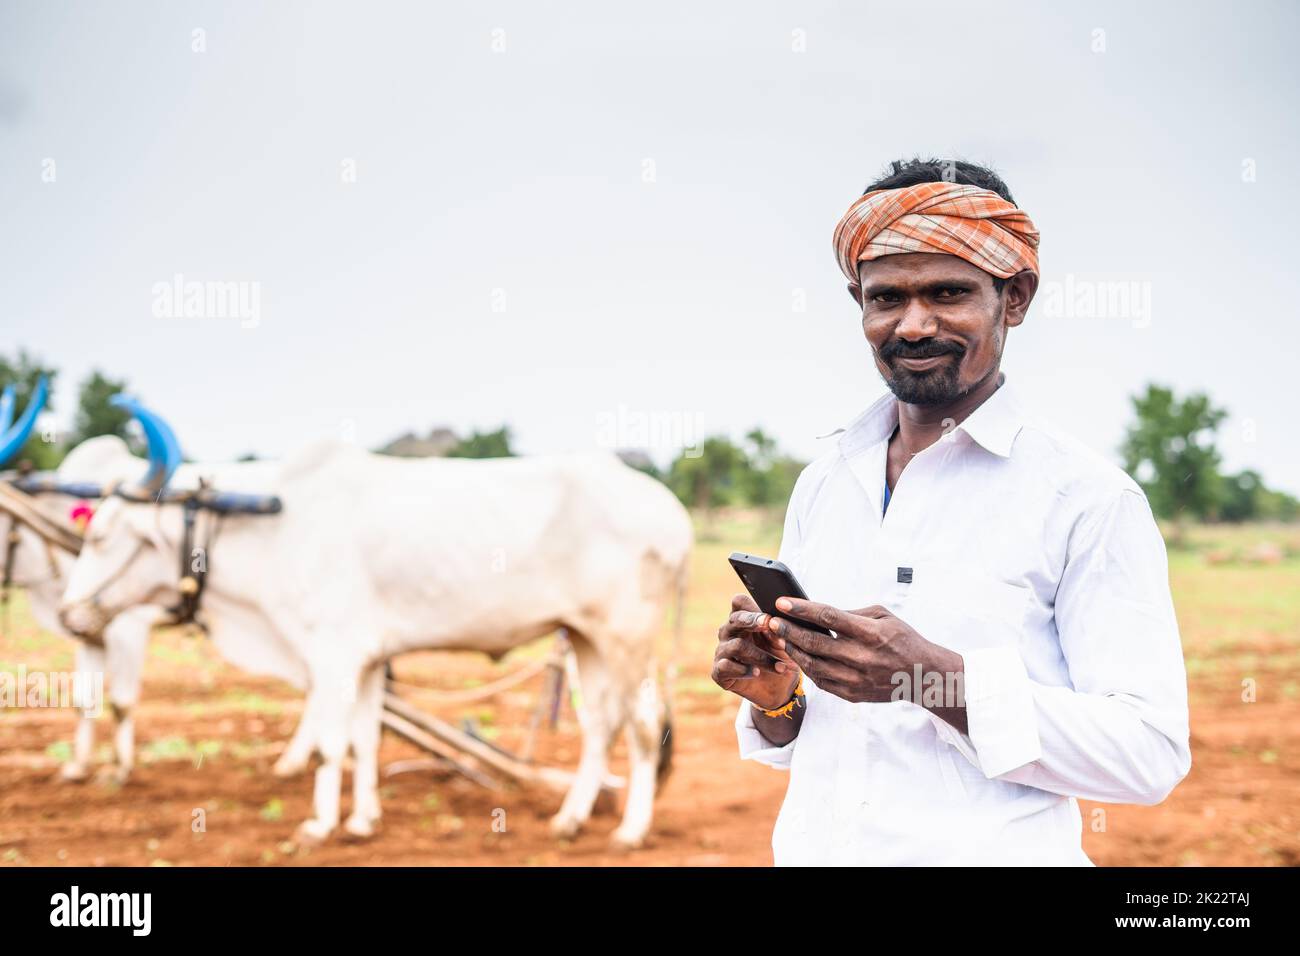 Portrait of happy smiling farmer with mobile phone looking at camera in fron ploughing cattlel at farmland Stock Photo